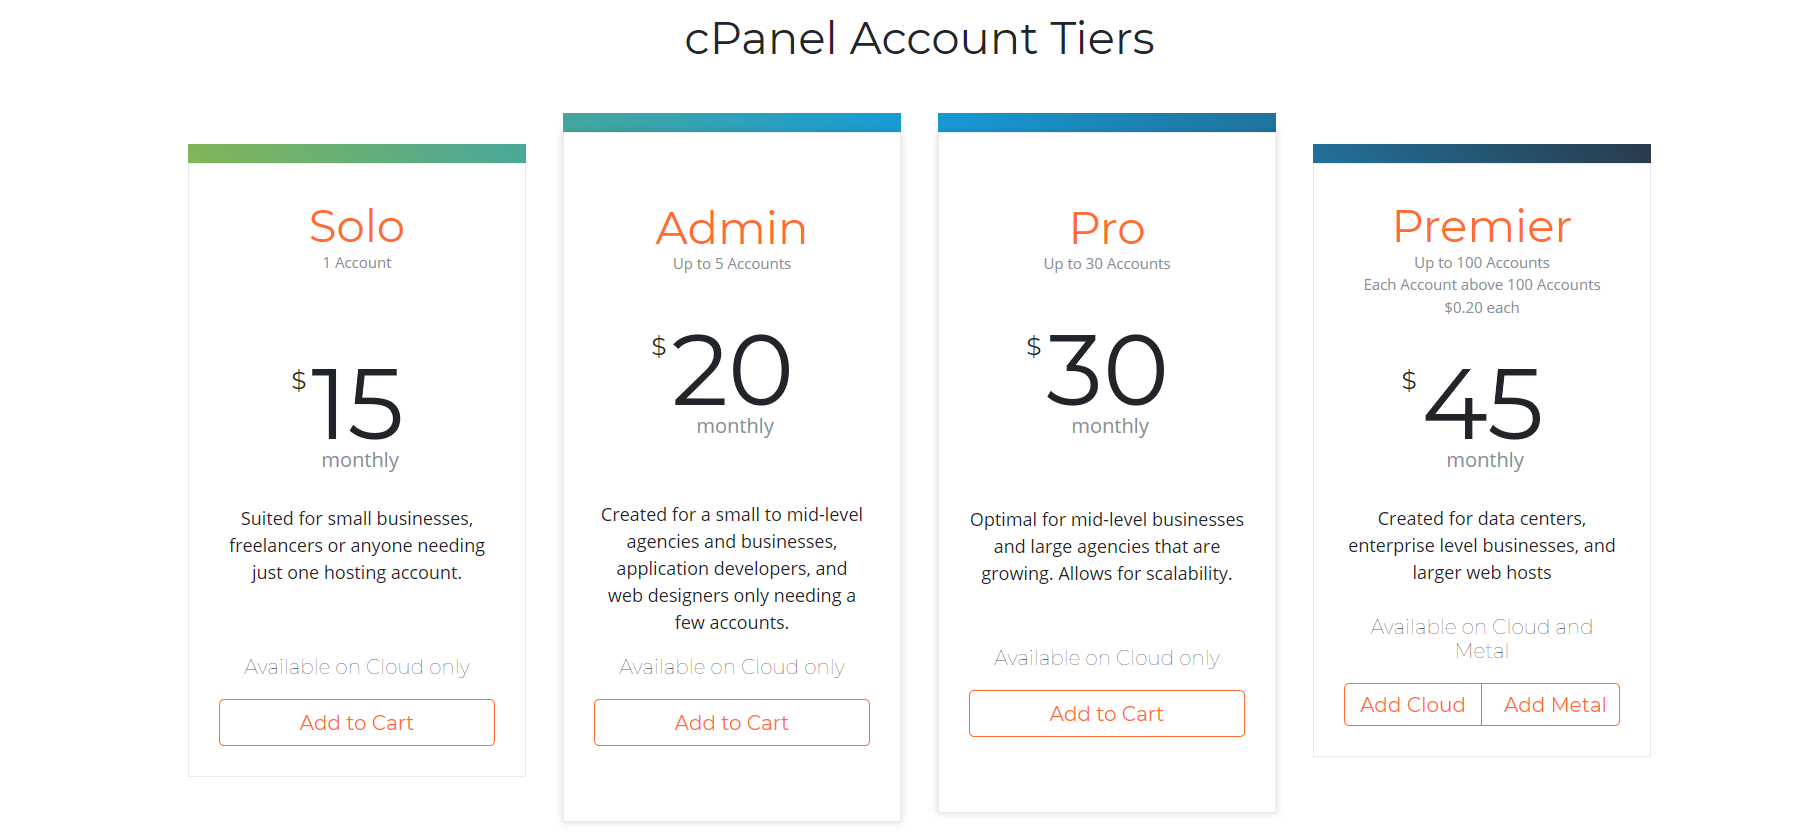 cpanel price cloud and metal